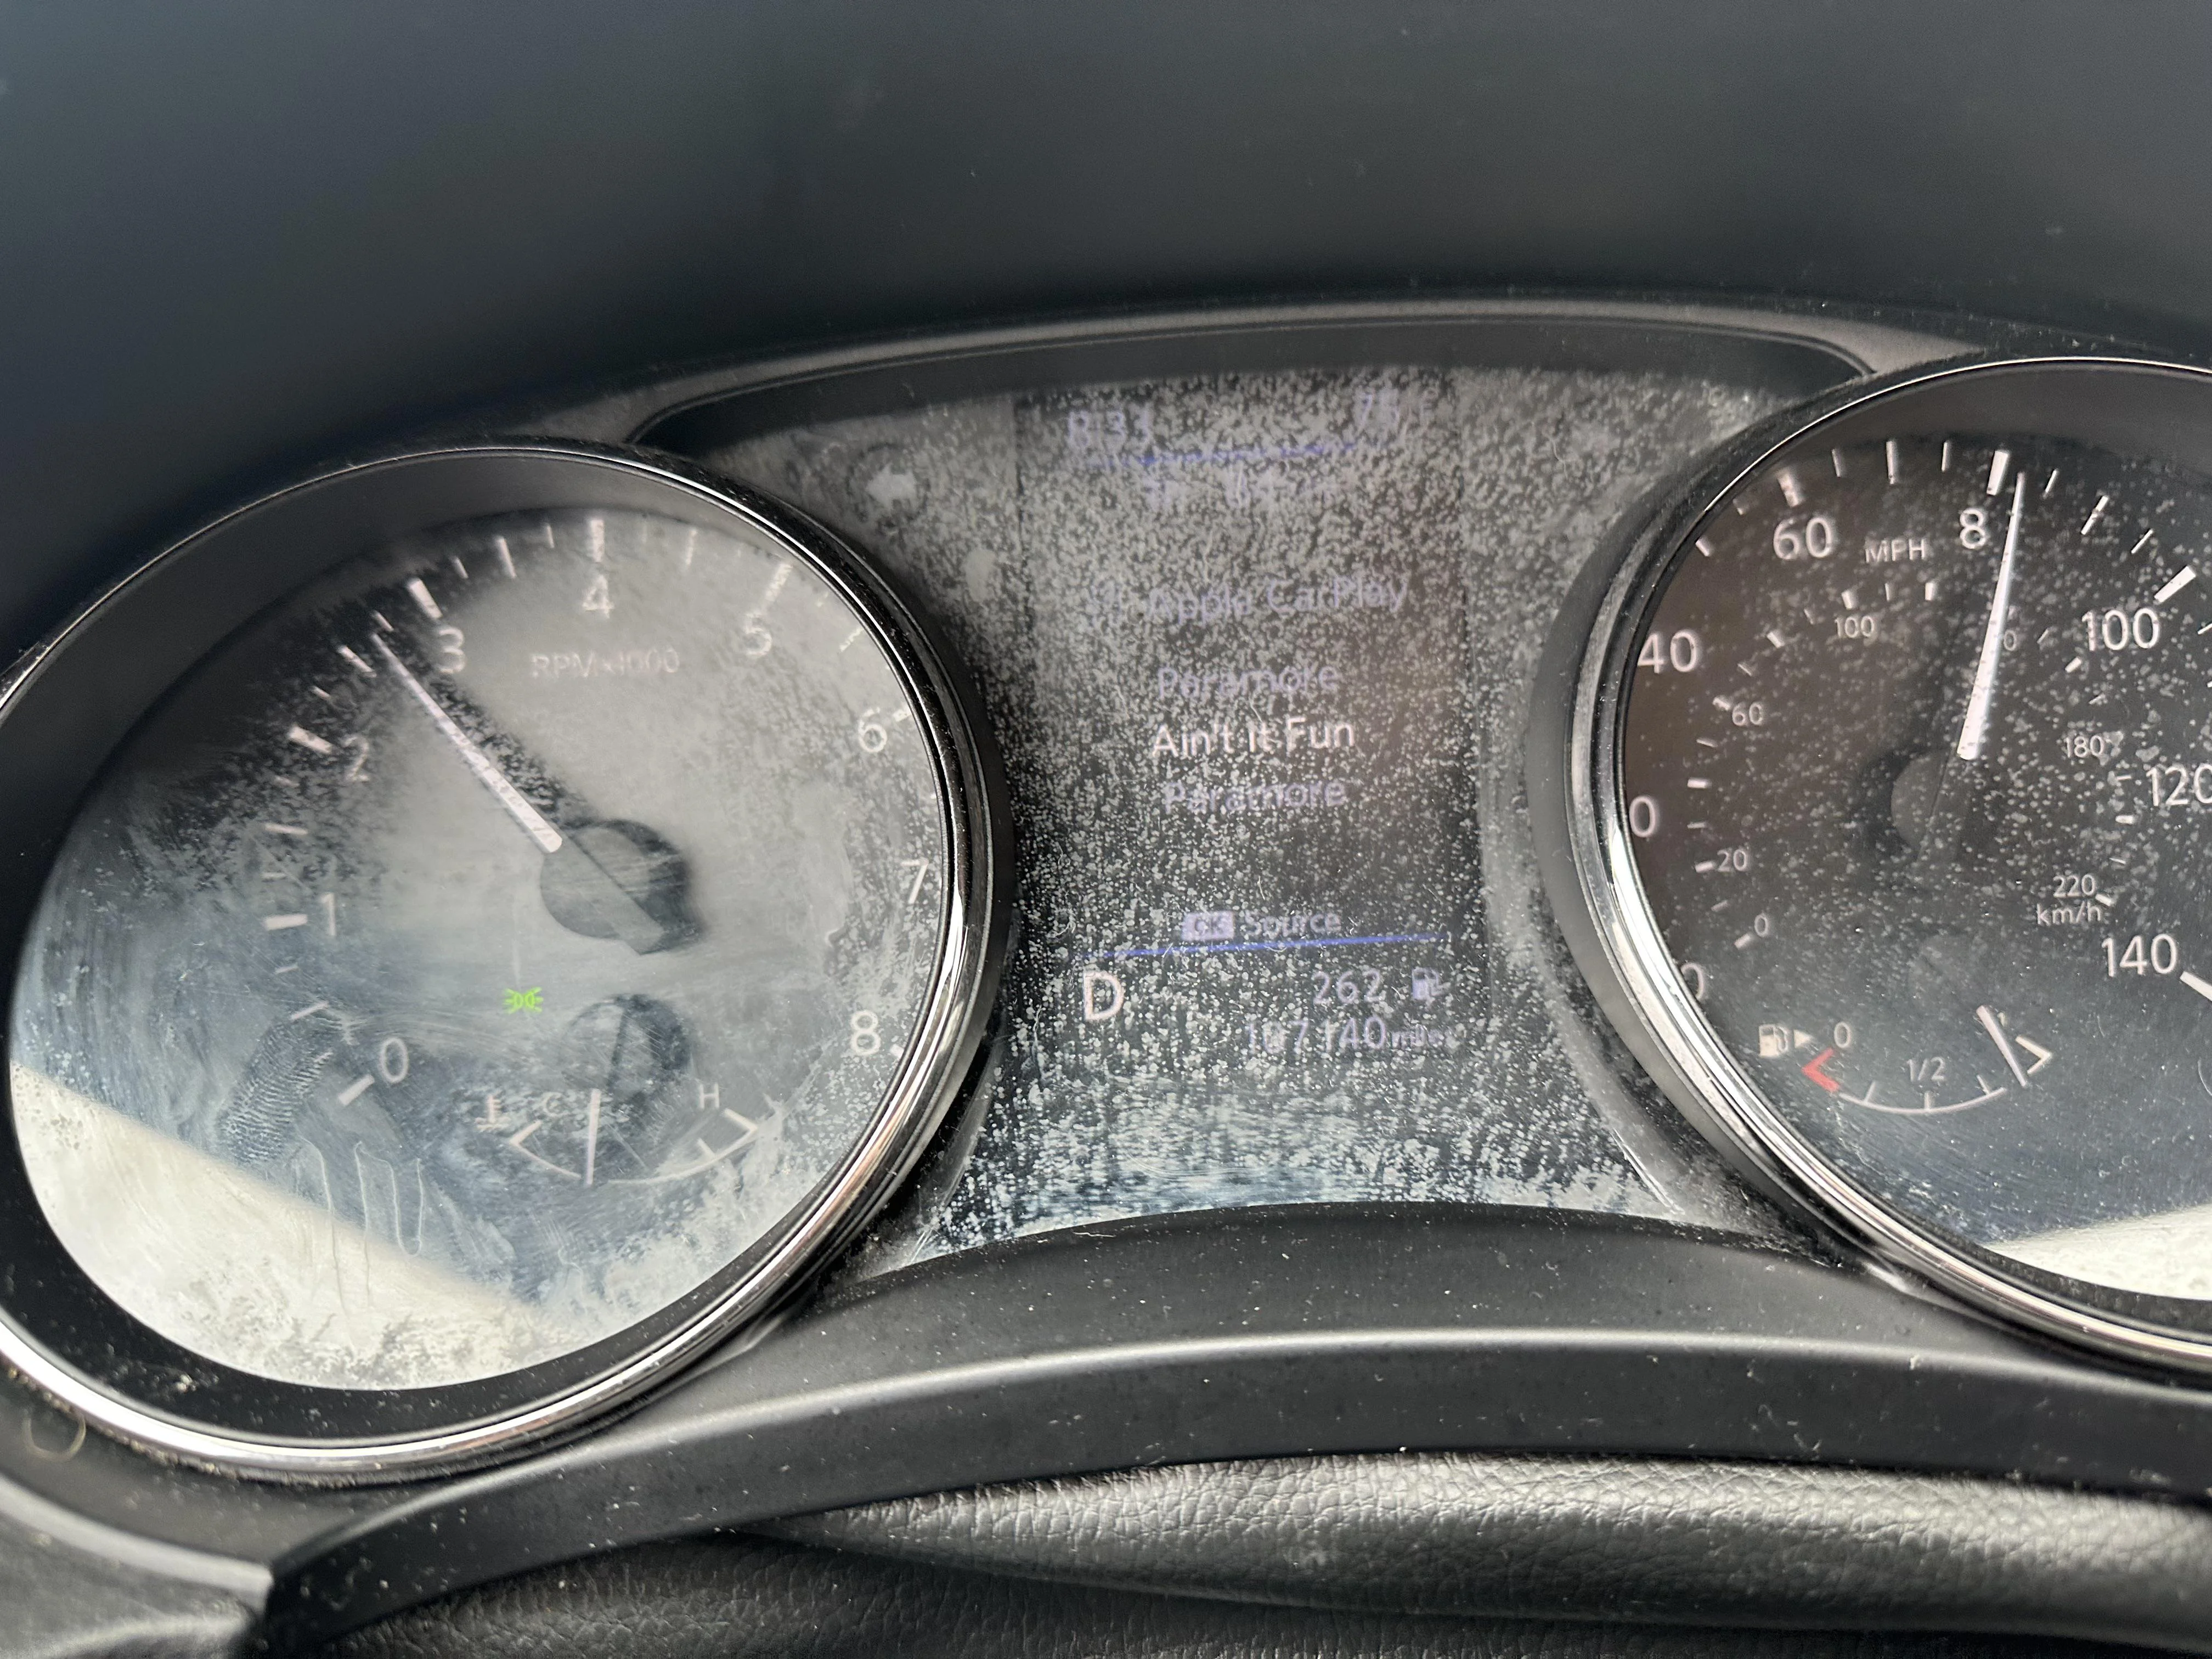 Does ArmorAll Crack Your Dash? The Truth About Using ArmorAll on Car Dashboards